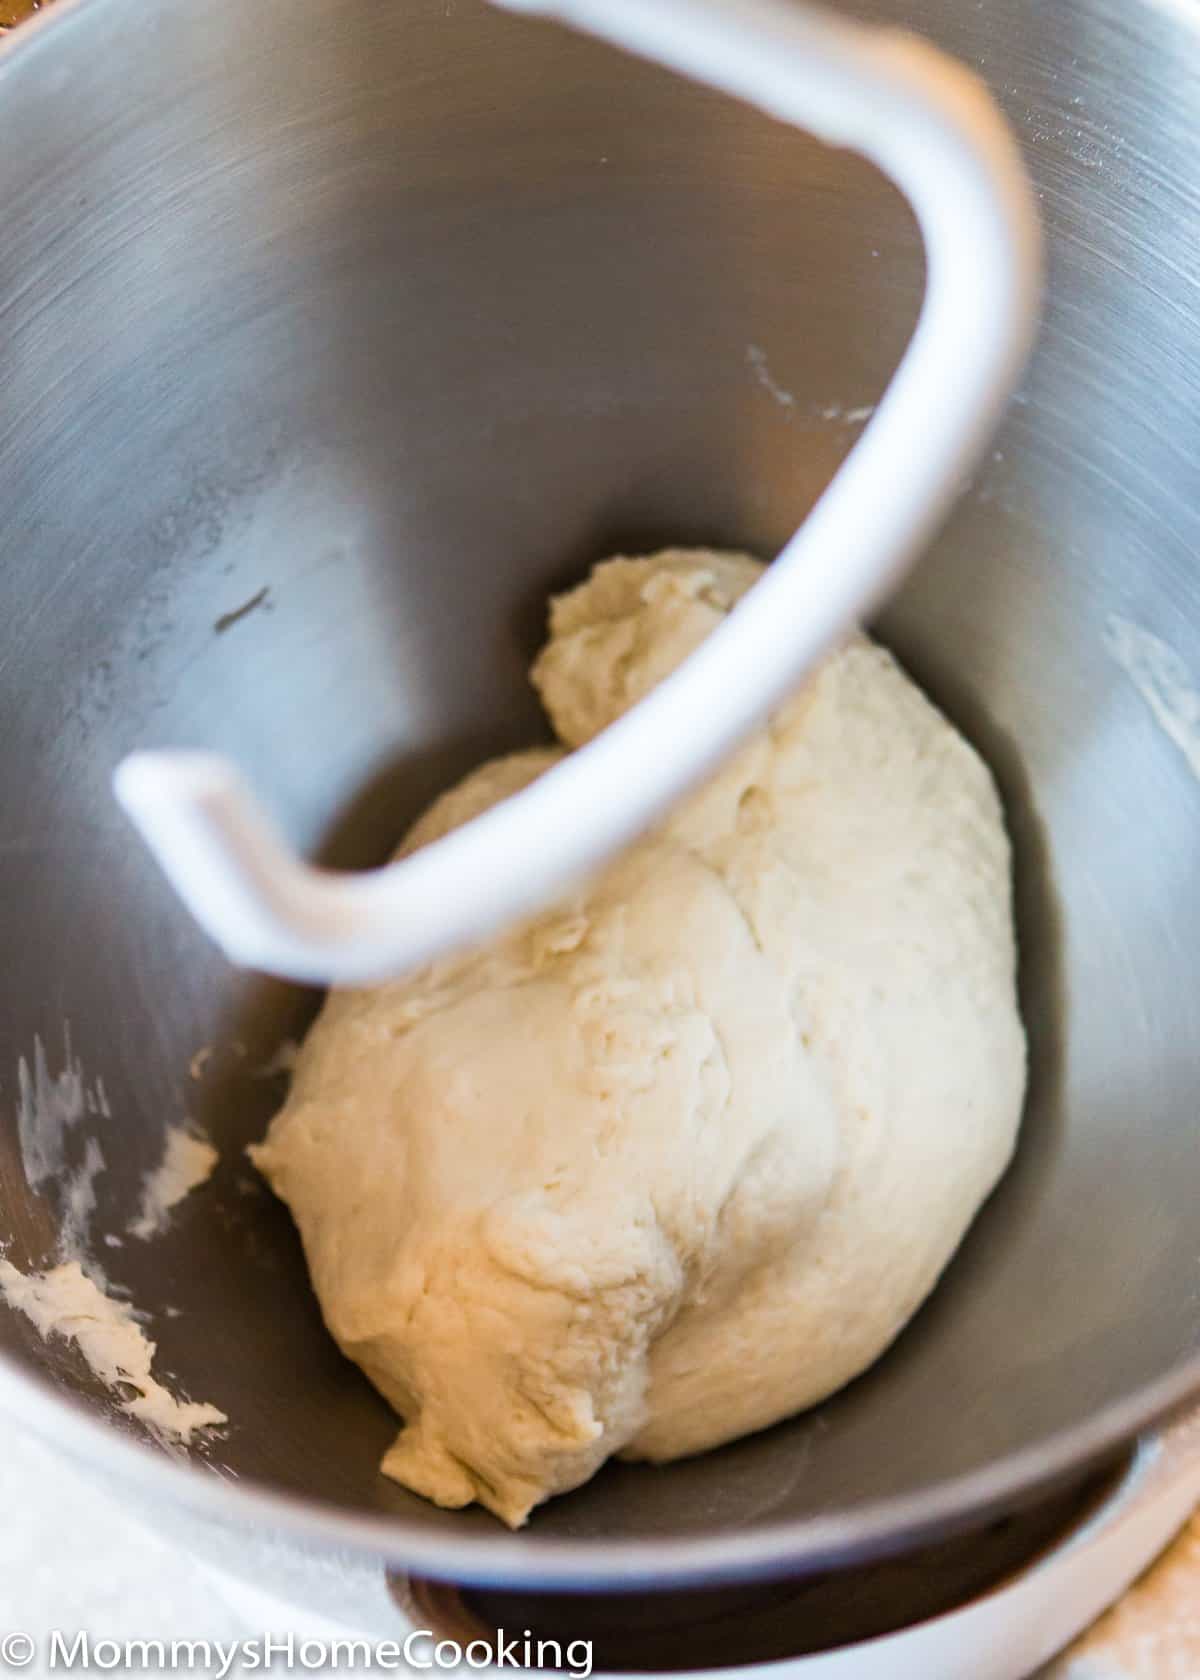 pizza dough in a bowl of a stand mixer.